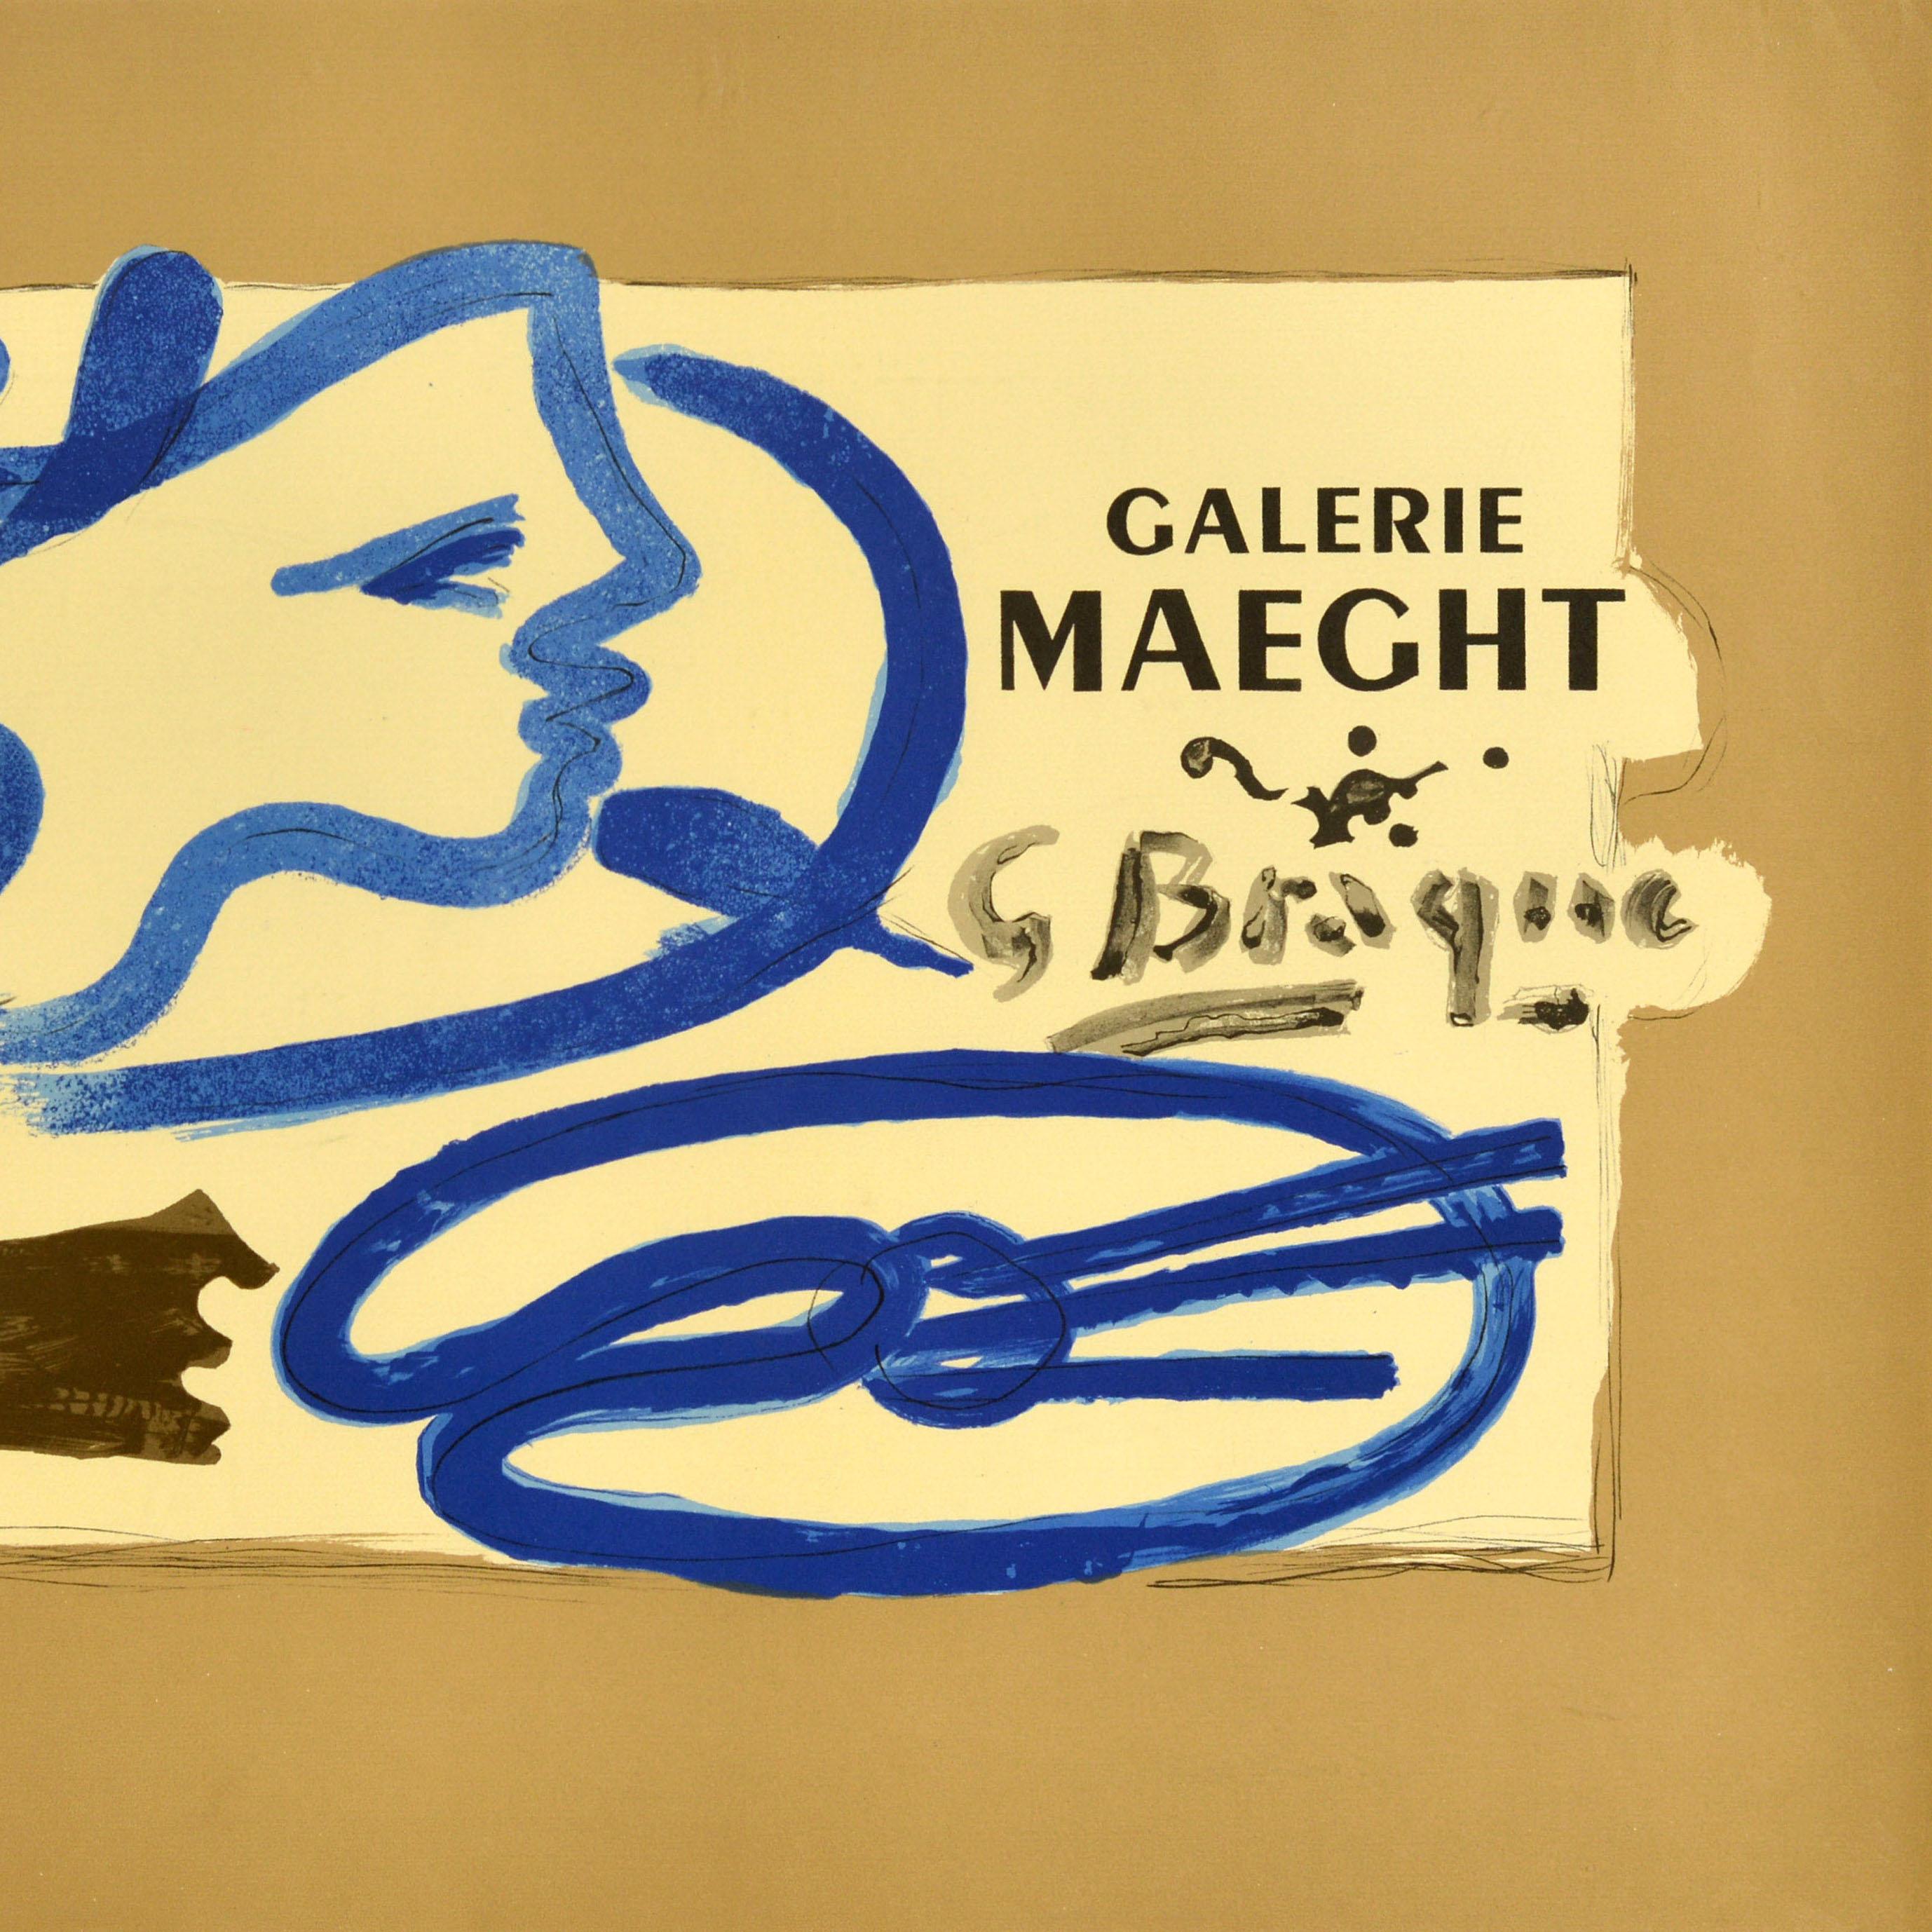 Original Vintage Art Exhibition Advertising Poster Georges Braque Galerie Maeght In Good Condition For Sale In London, GB